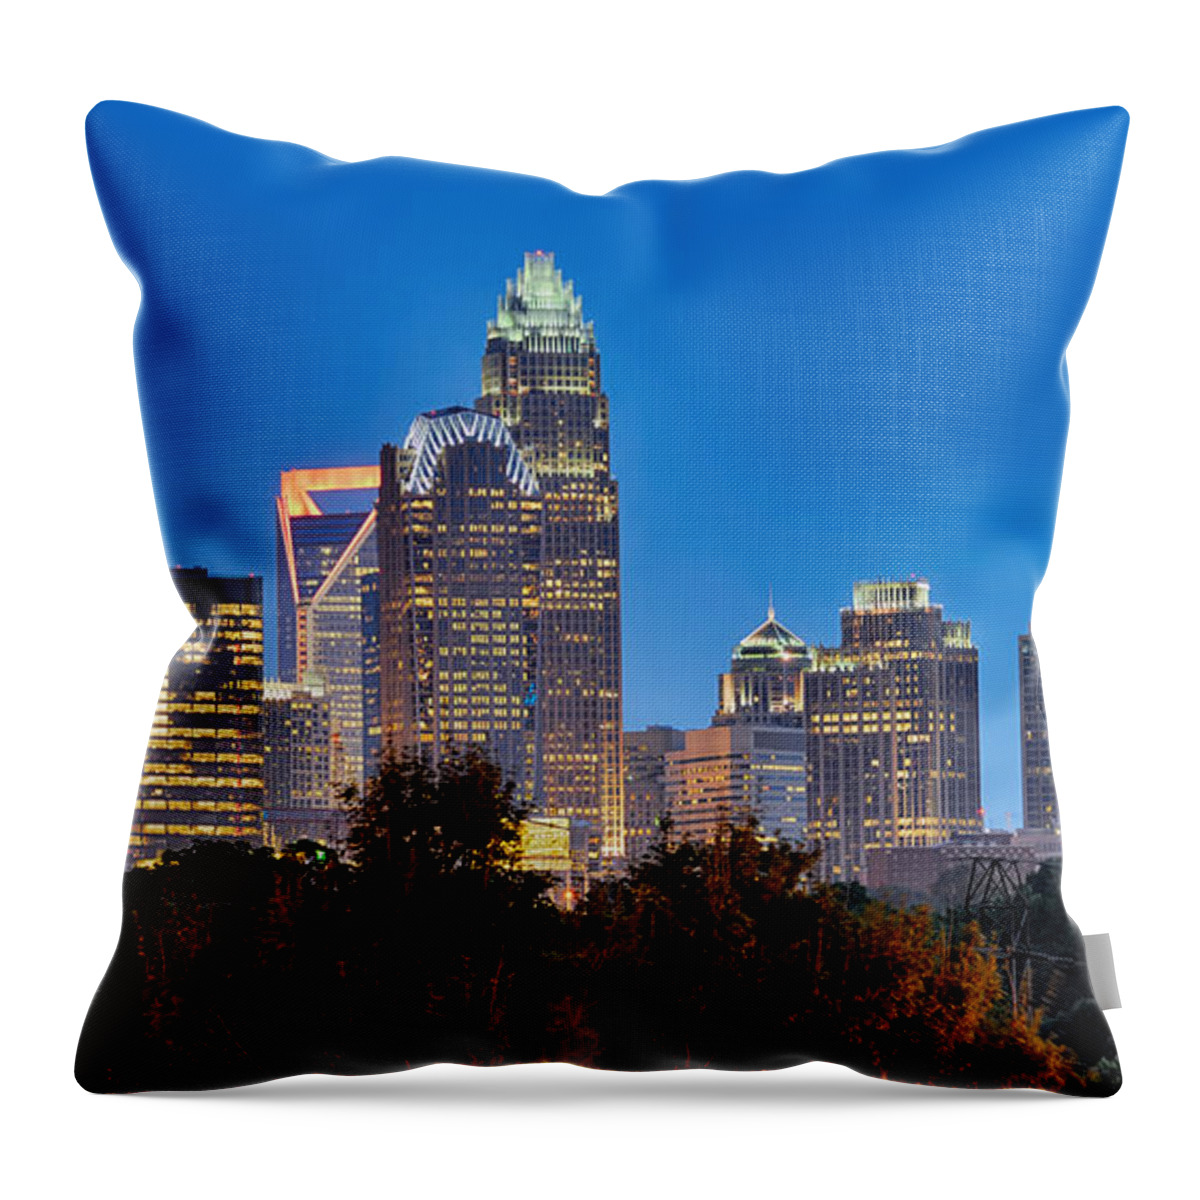 Charlotte Throw Pillow featuring the photograph Charlotte View From Cordelia Park by Alex Grichenko